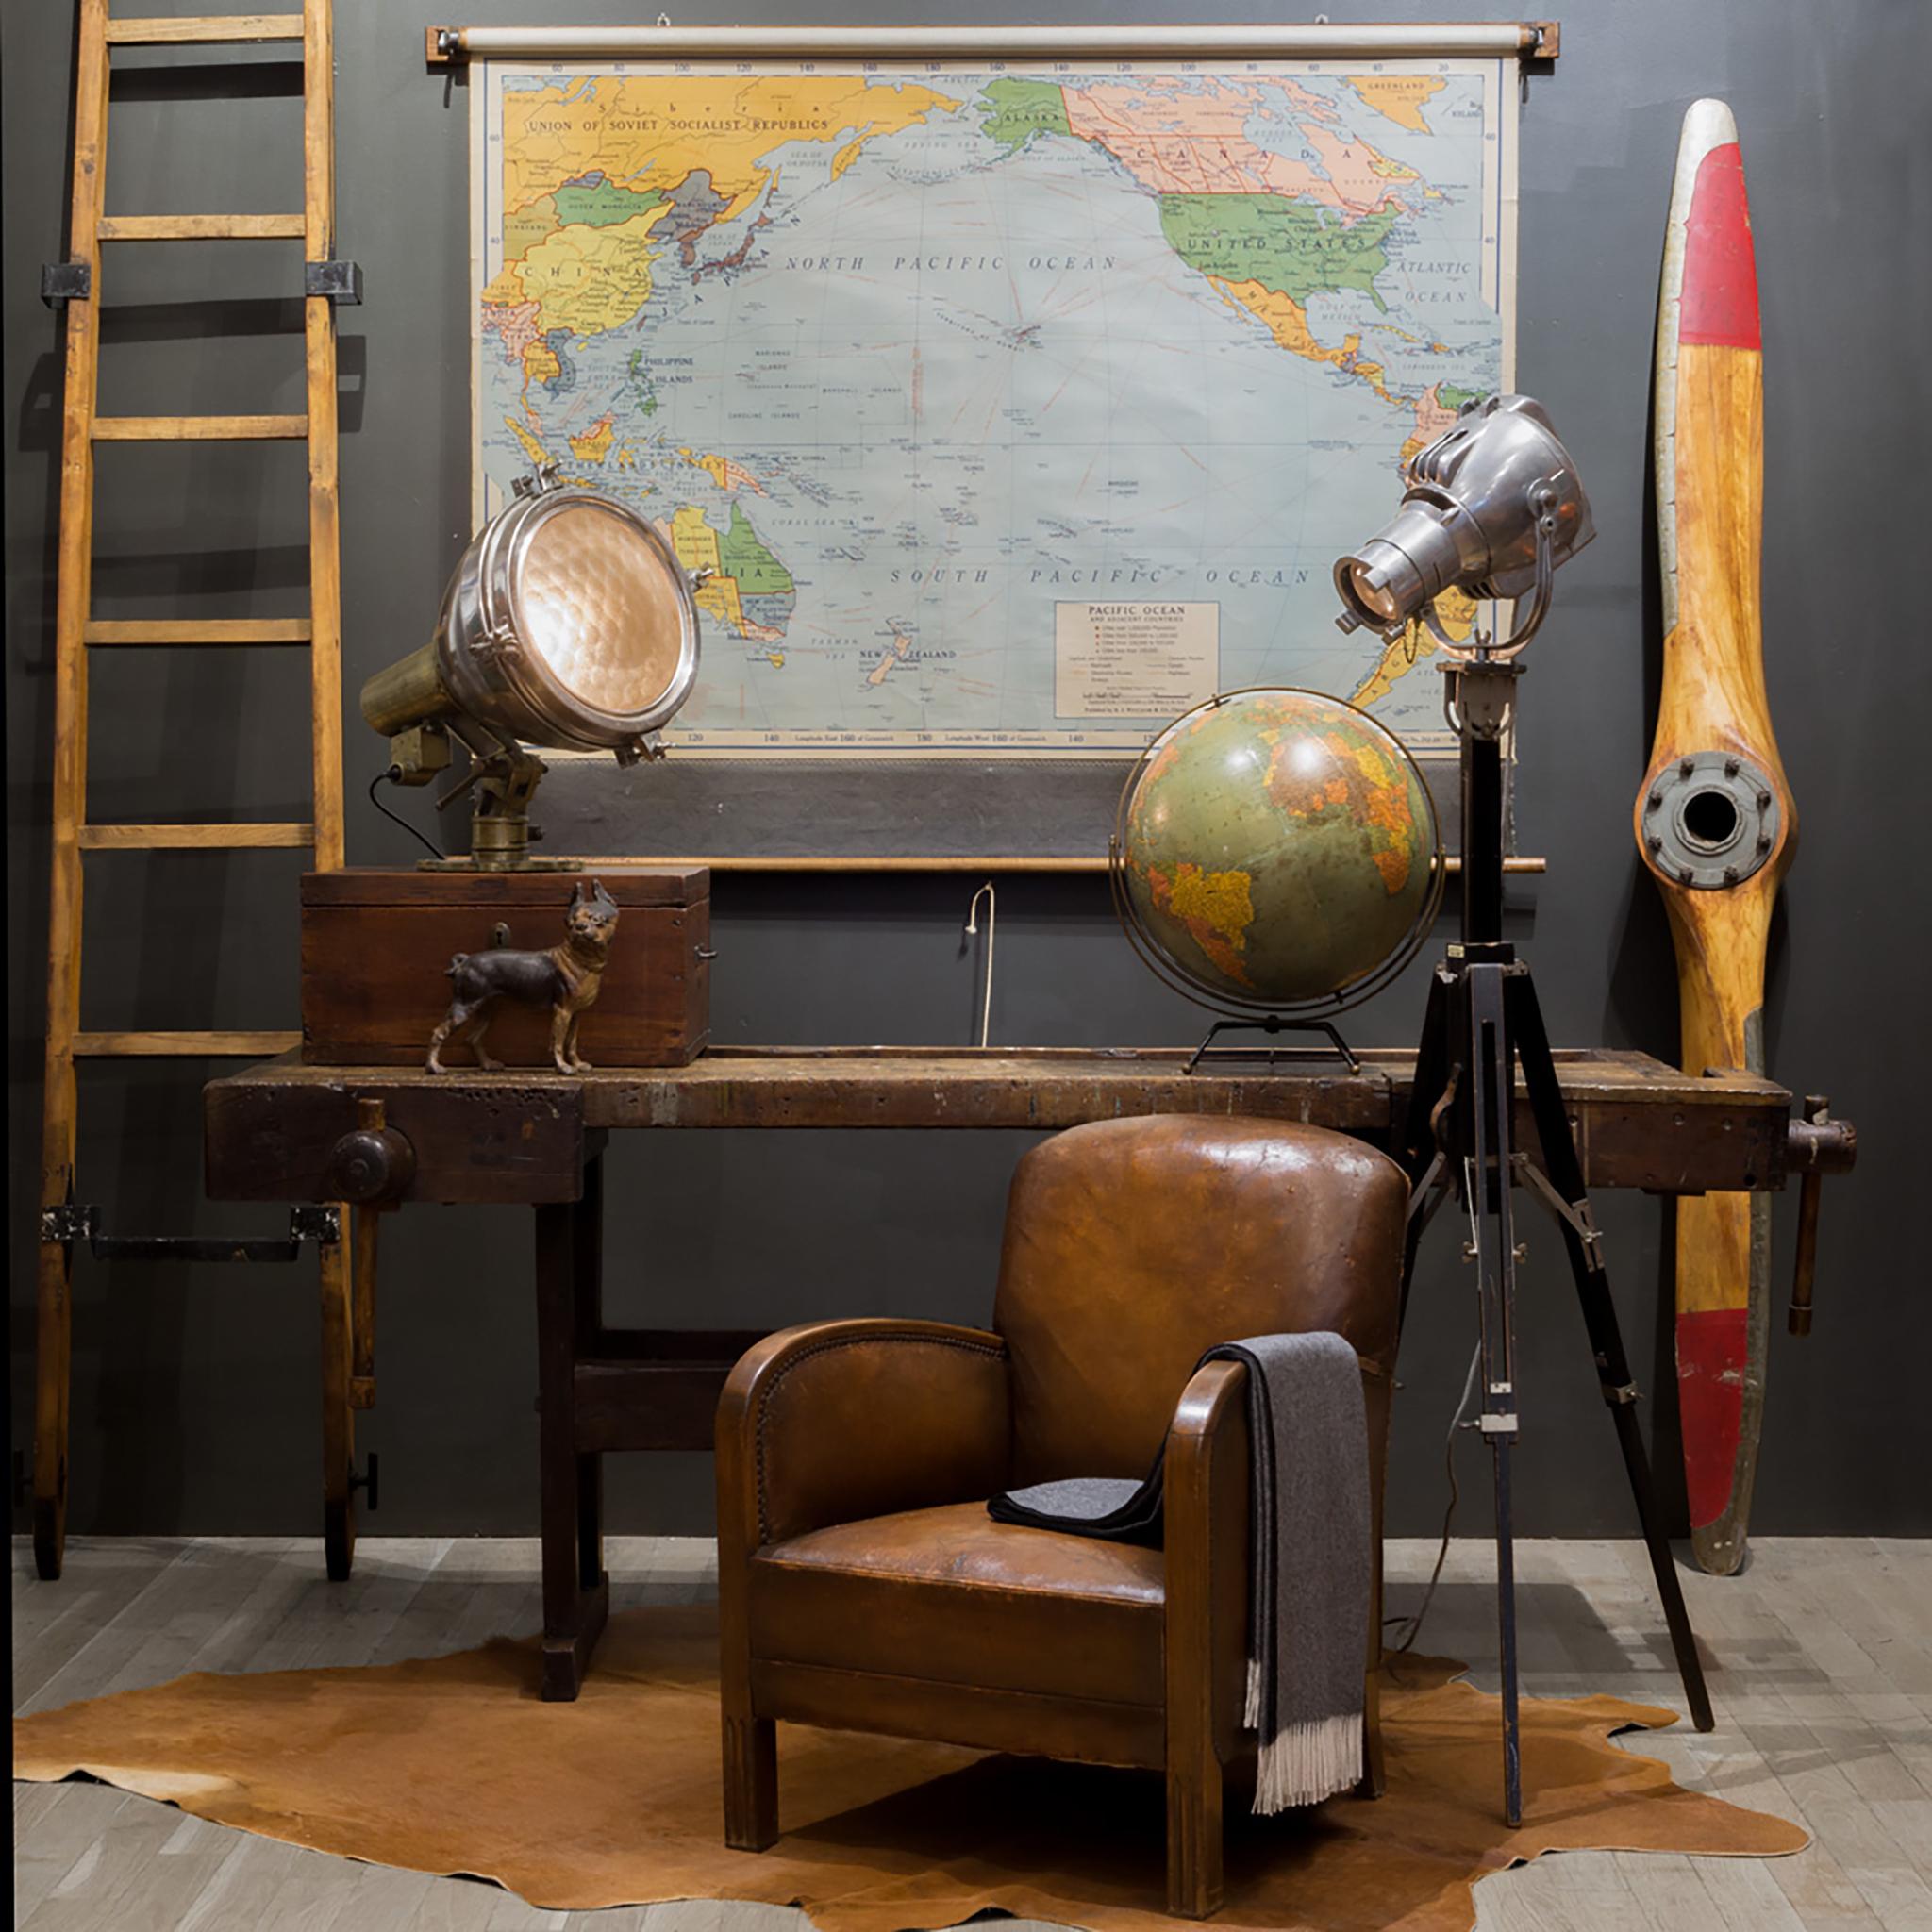 About

This will ship parcel. Contact us for a shipping quote. S16 Home San Francisco. 

A large vintage pull down classroom map of the Pacific Ocean and adjacent countries on two large original wooden dowels and wooden back for mounting. The